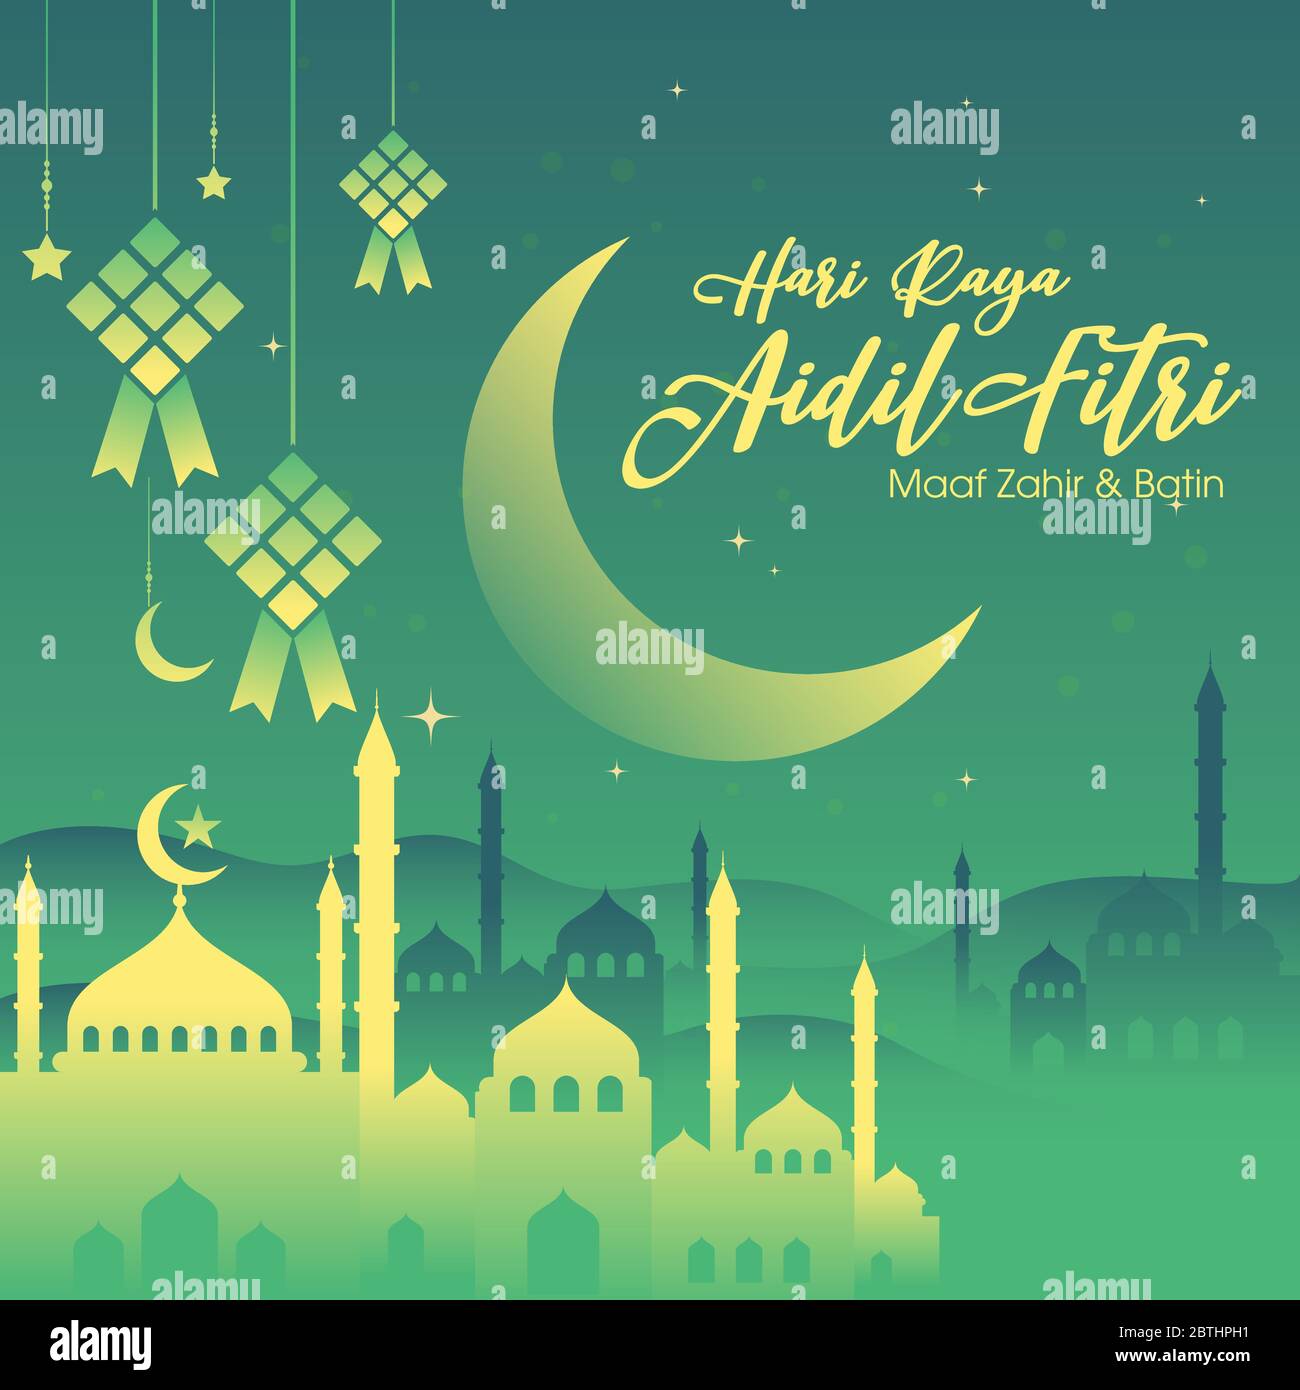 Muslim abstract greeting banners. Islamic vector illustration Stock ...